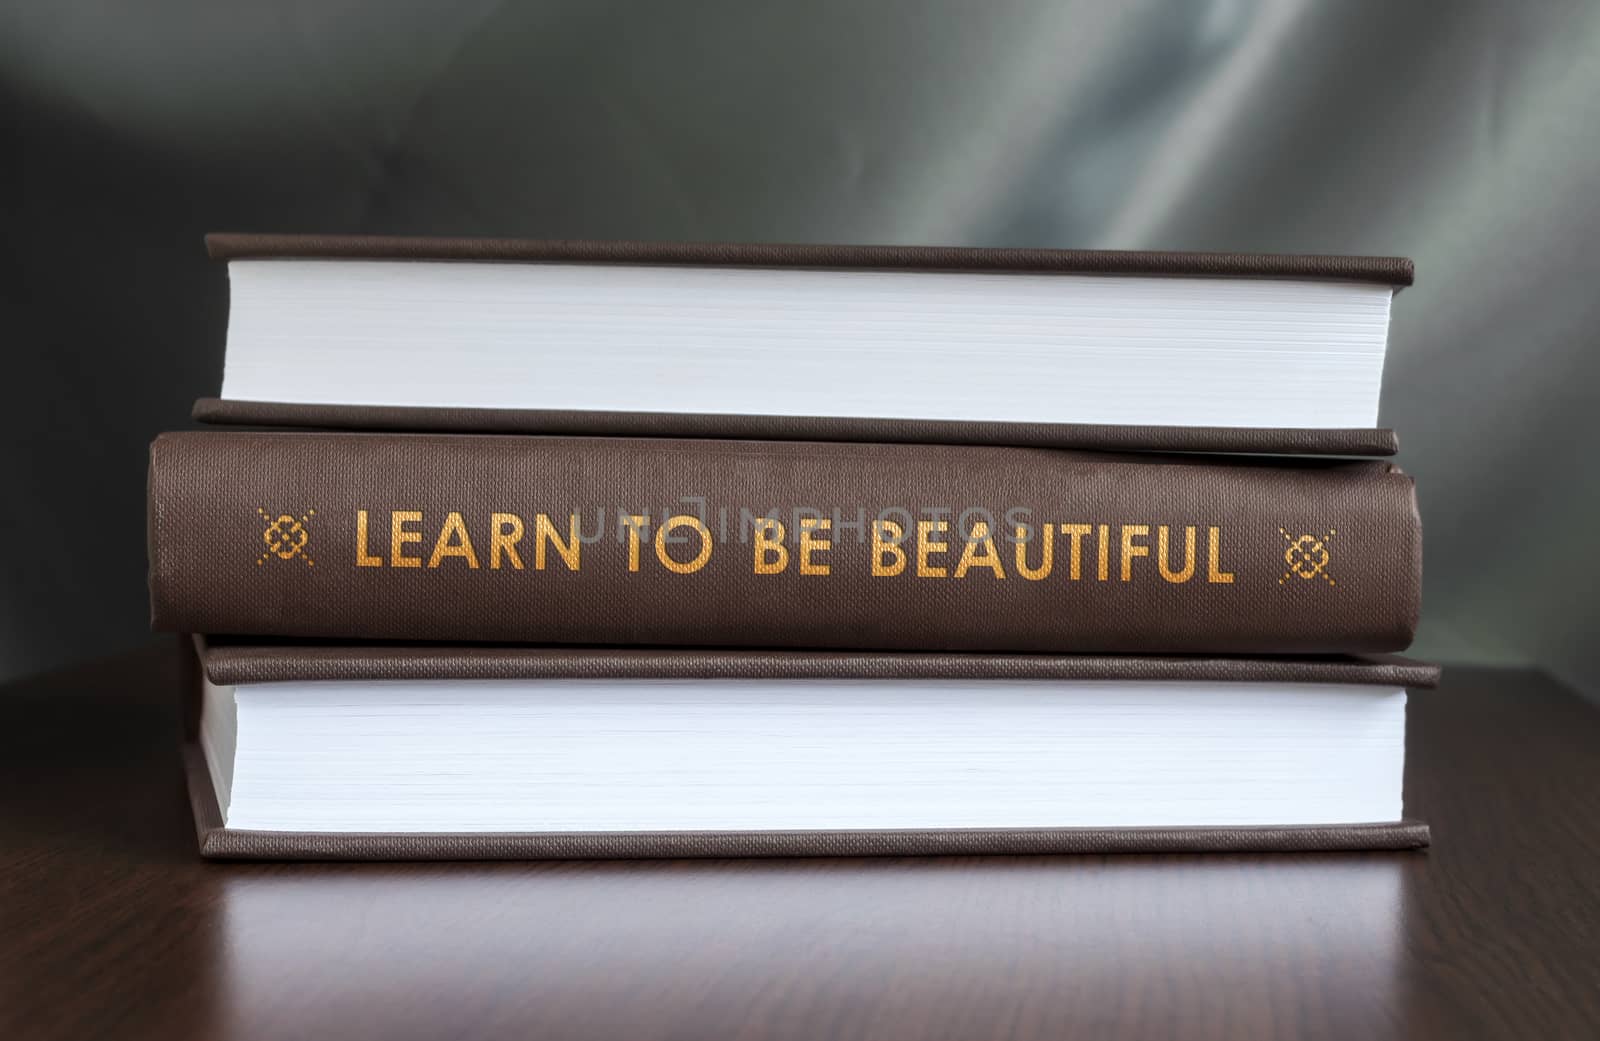 Books on a table and one with " Learn to be beautiful. " cover. Book concept.